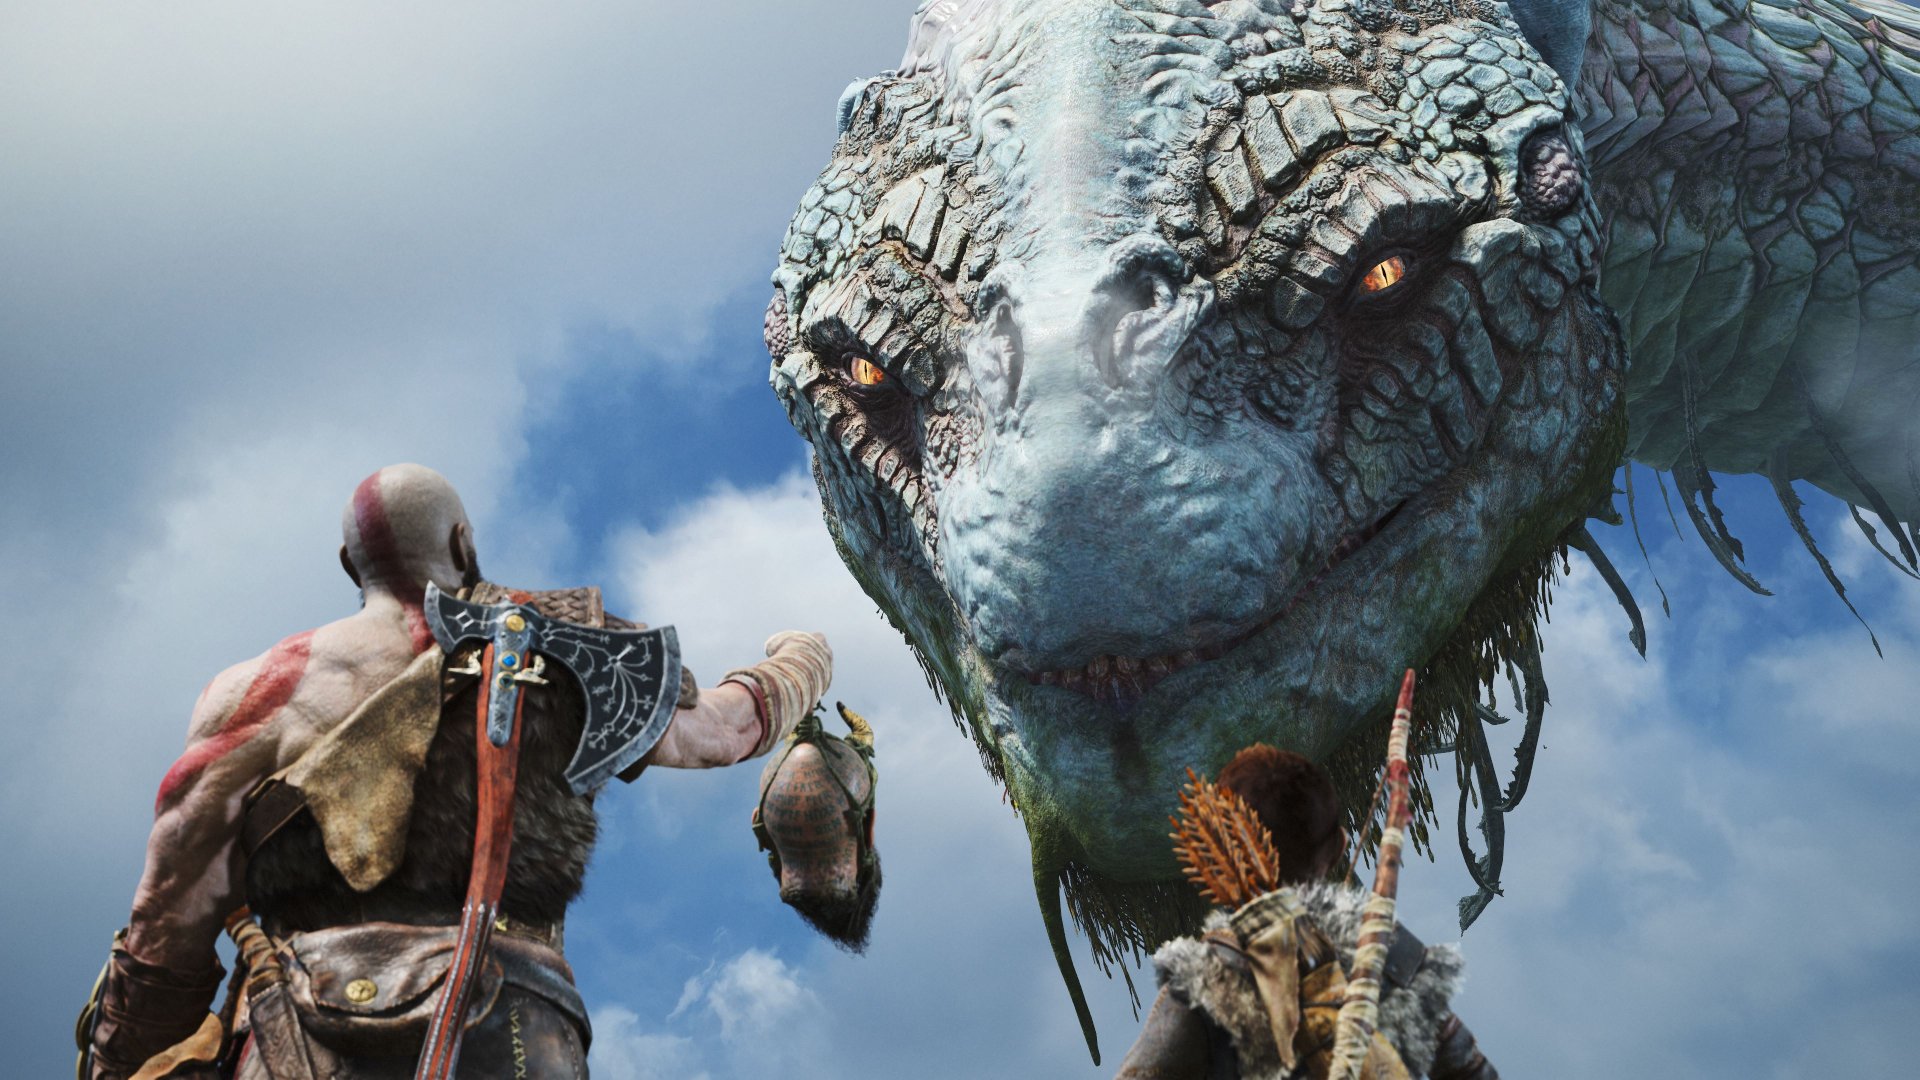 God of War Ragnarok is cheaper than ever on PS5, thanks to this